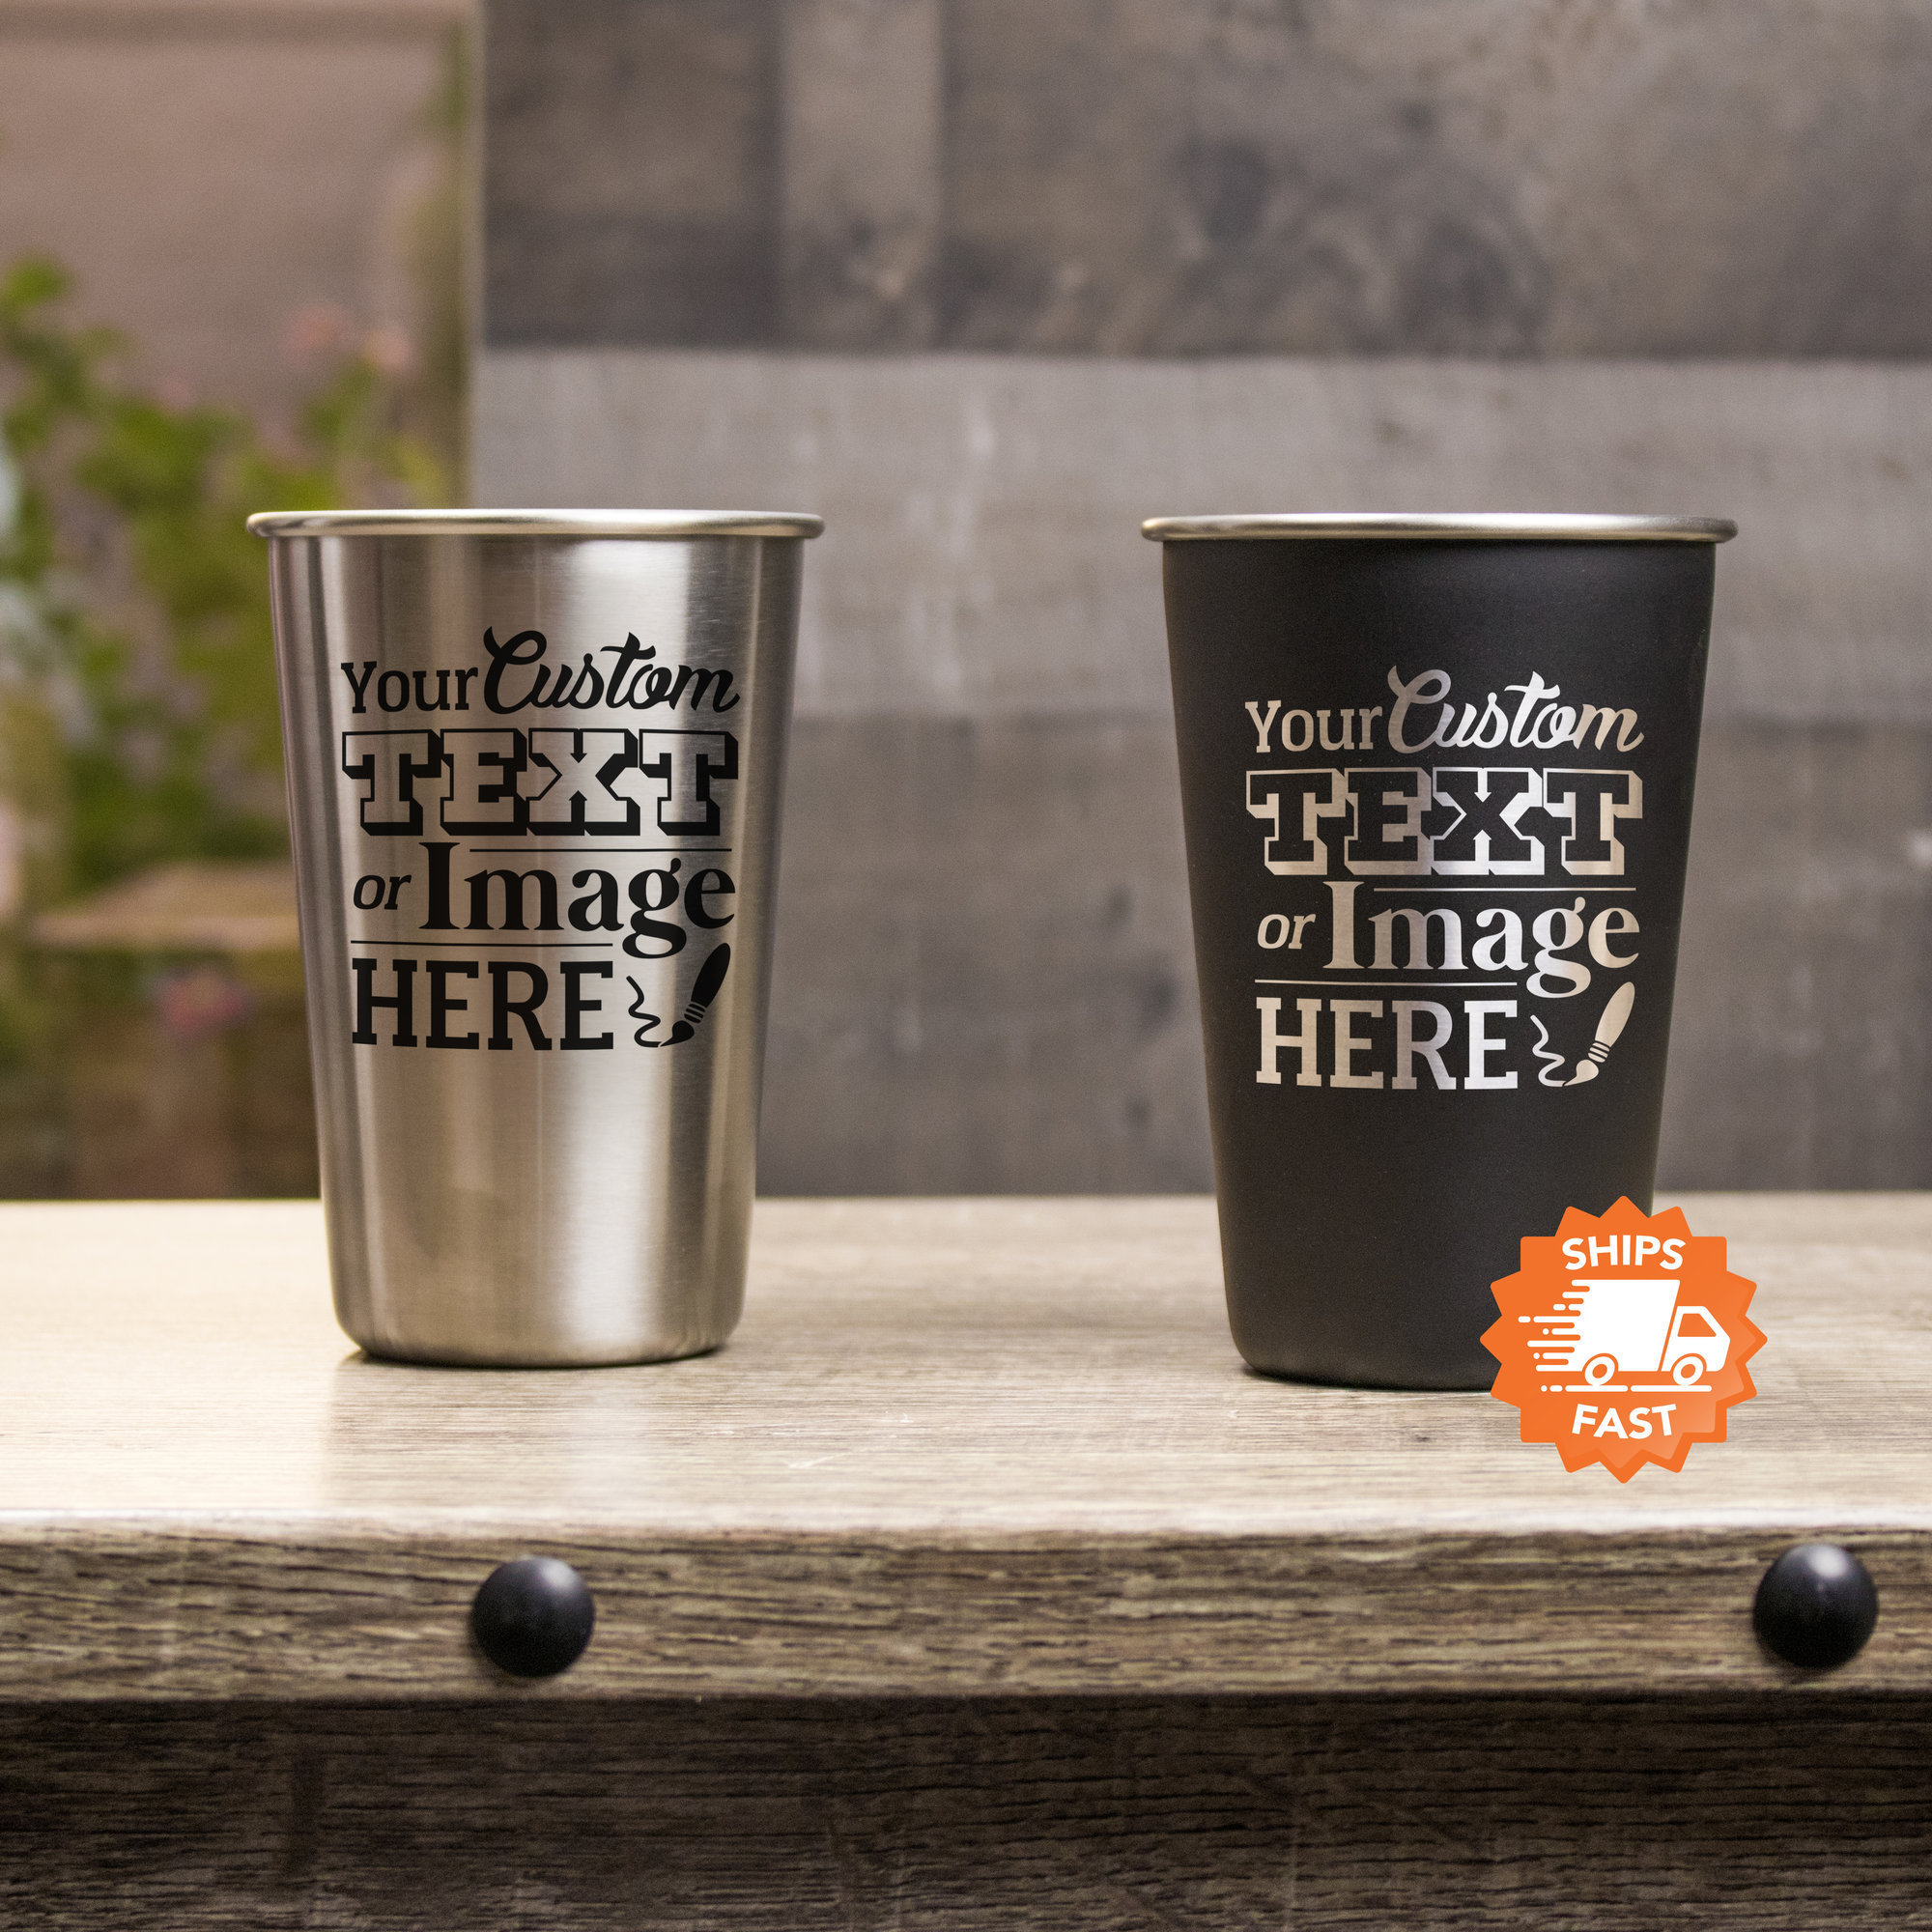 Herrnalise Stainless Steel Cups, Water Beer Tumblers for Bar,Home